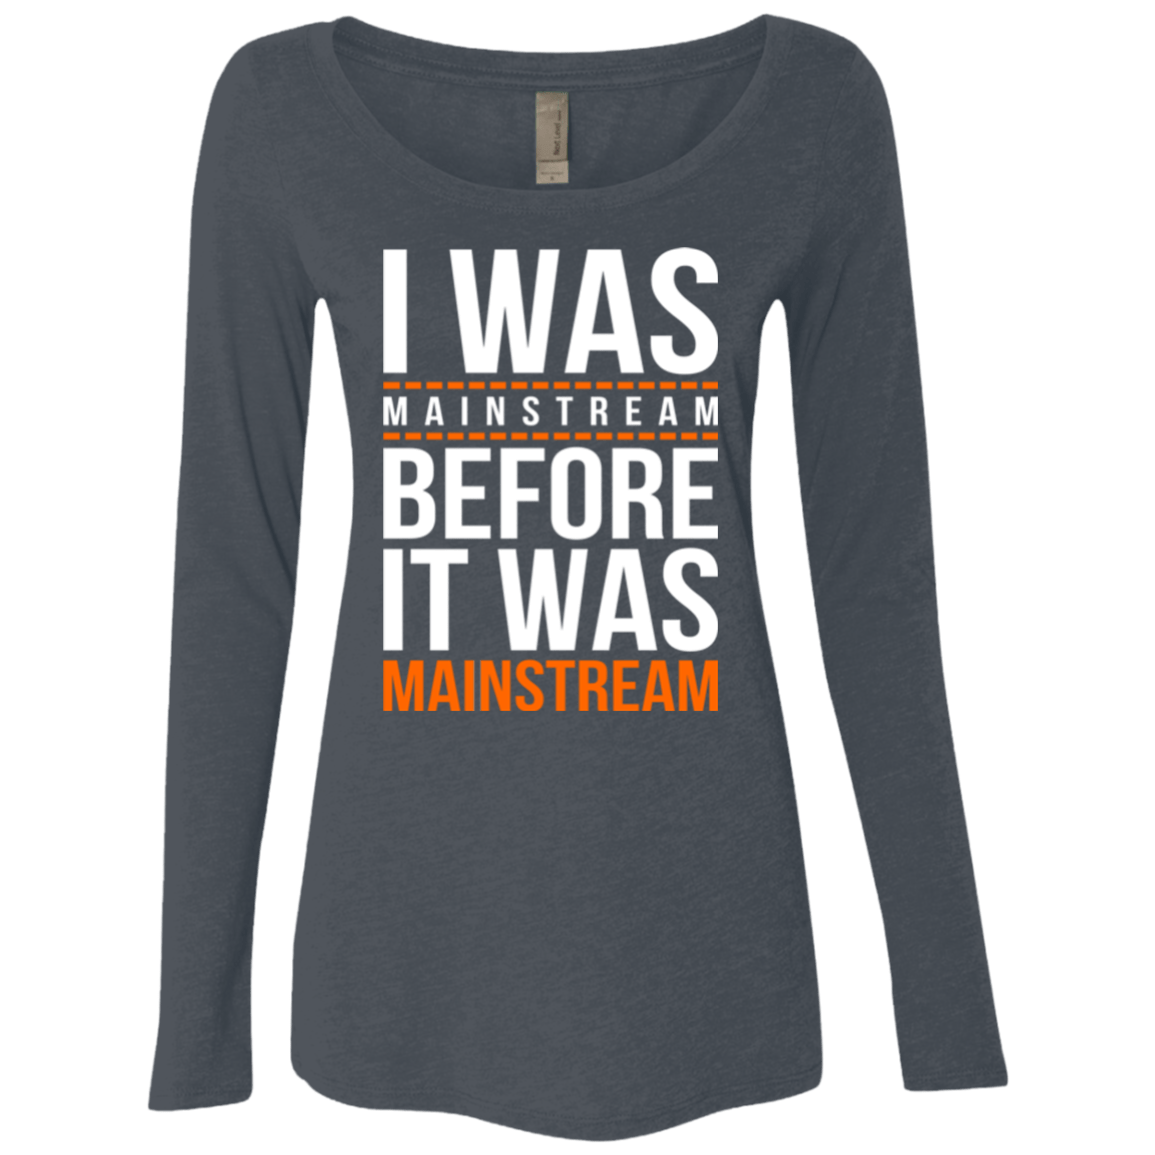 T-Shirts Vintage Navy / Small I was mainstream Women's Triblend Long Sleeve Shirt